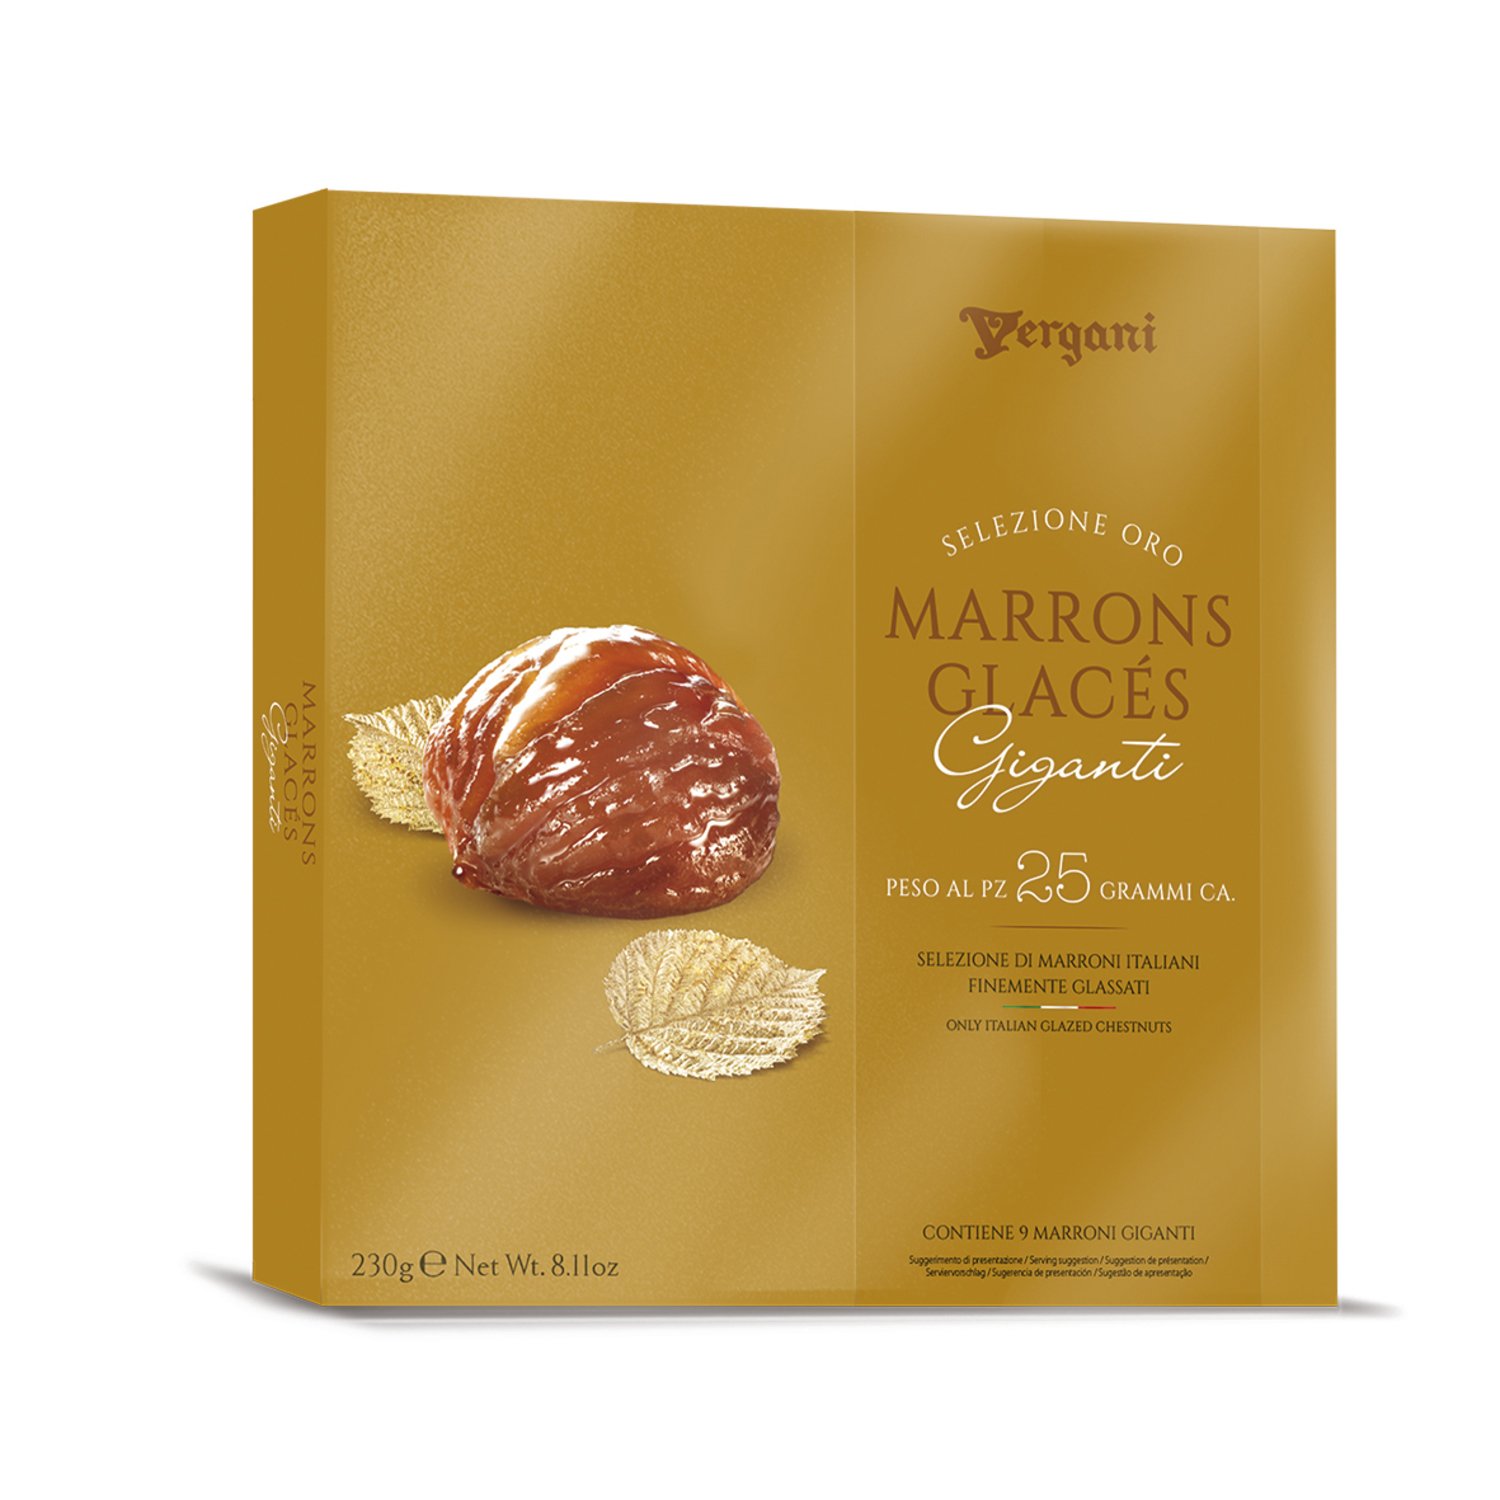 Vergani traditional Marrons Glacés in gift box - app 25g pieces - 8x230g